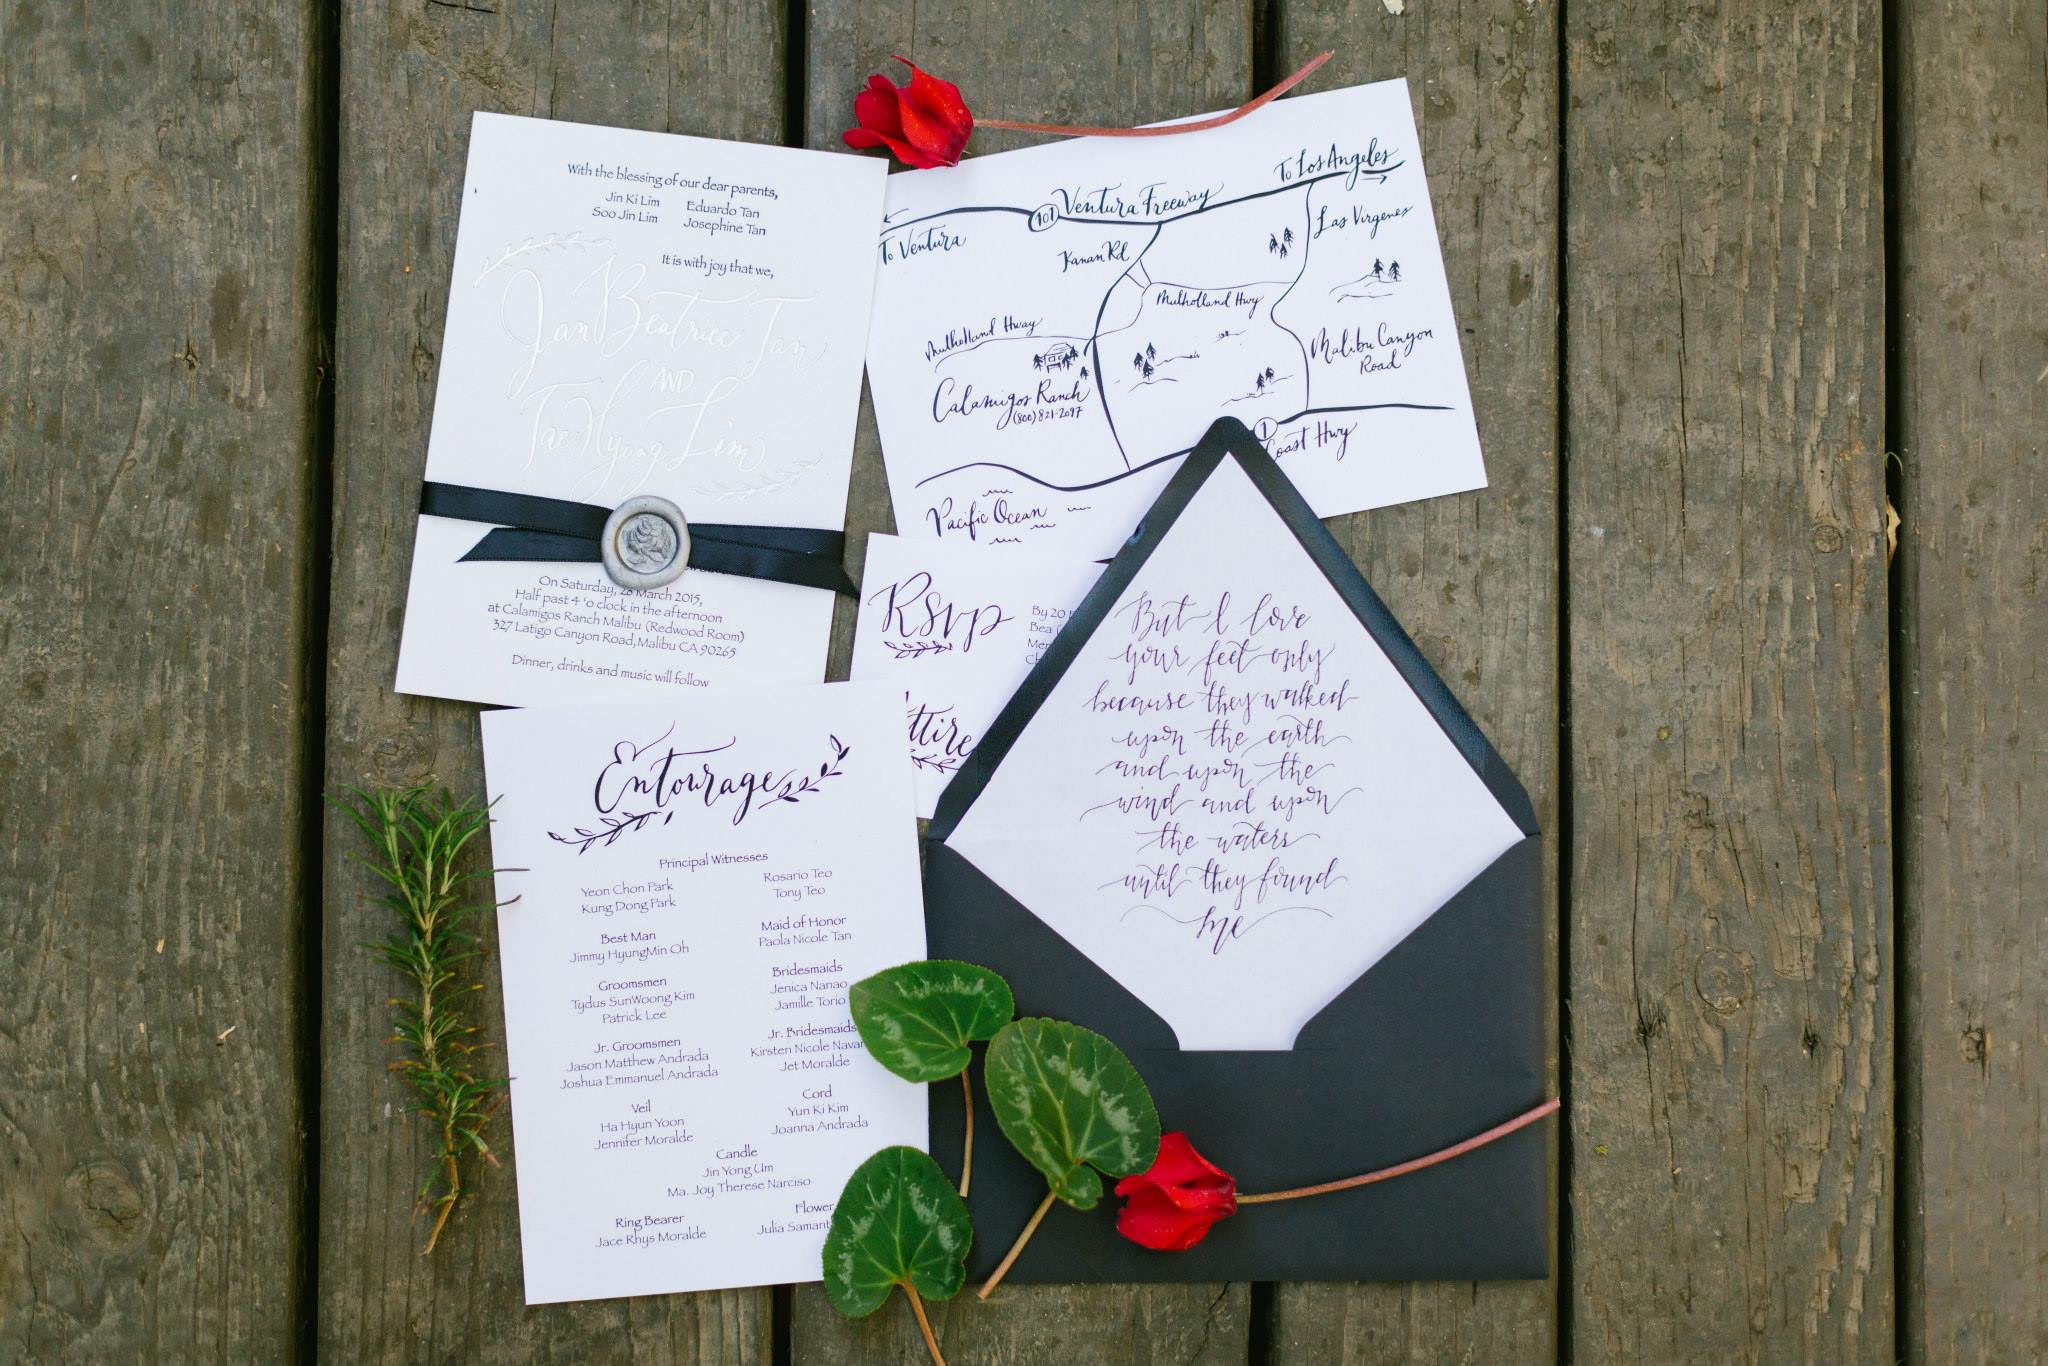 Rustic and elegant wedding at Calamigos Ranch in the Redwood room, black and white wedding invitation